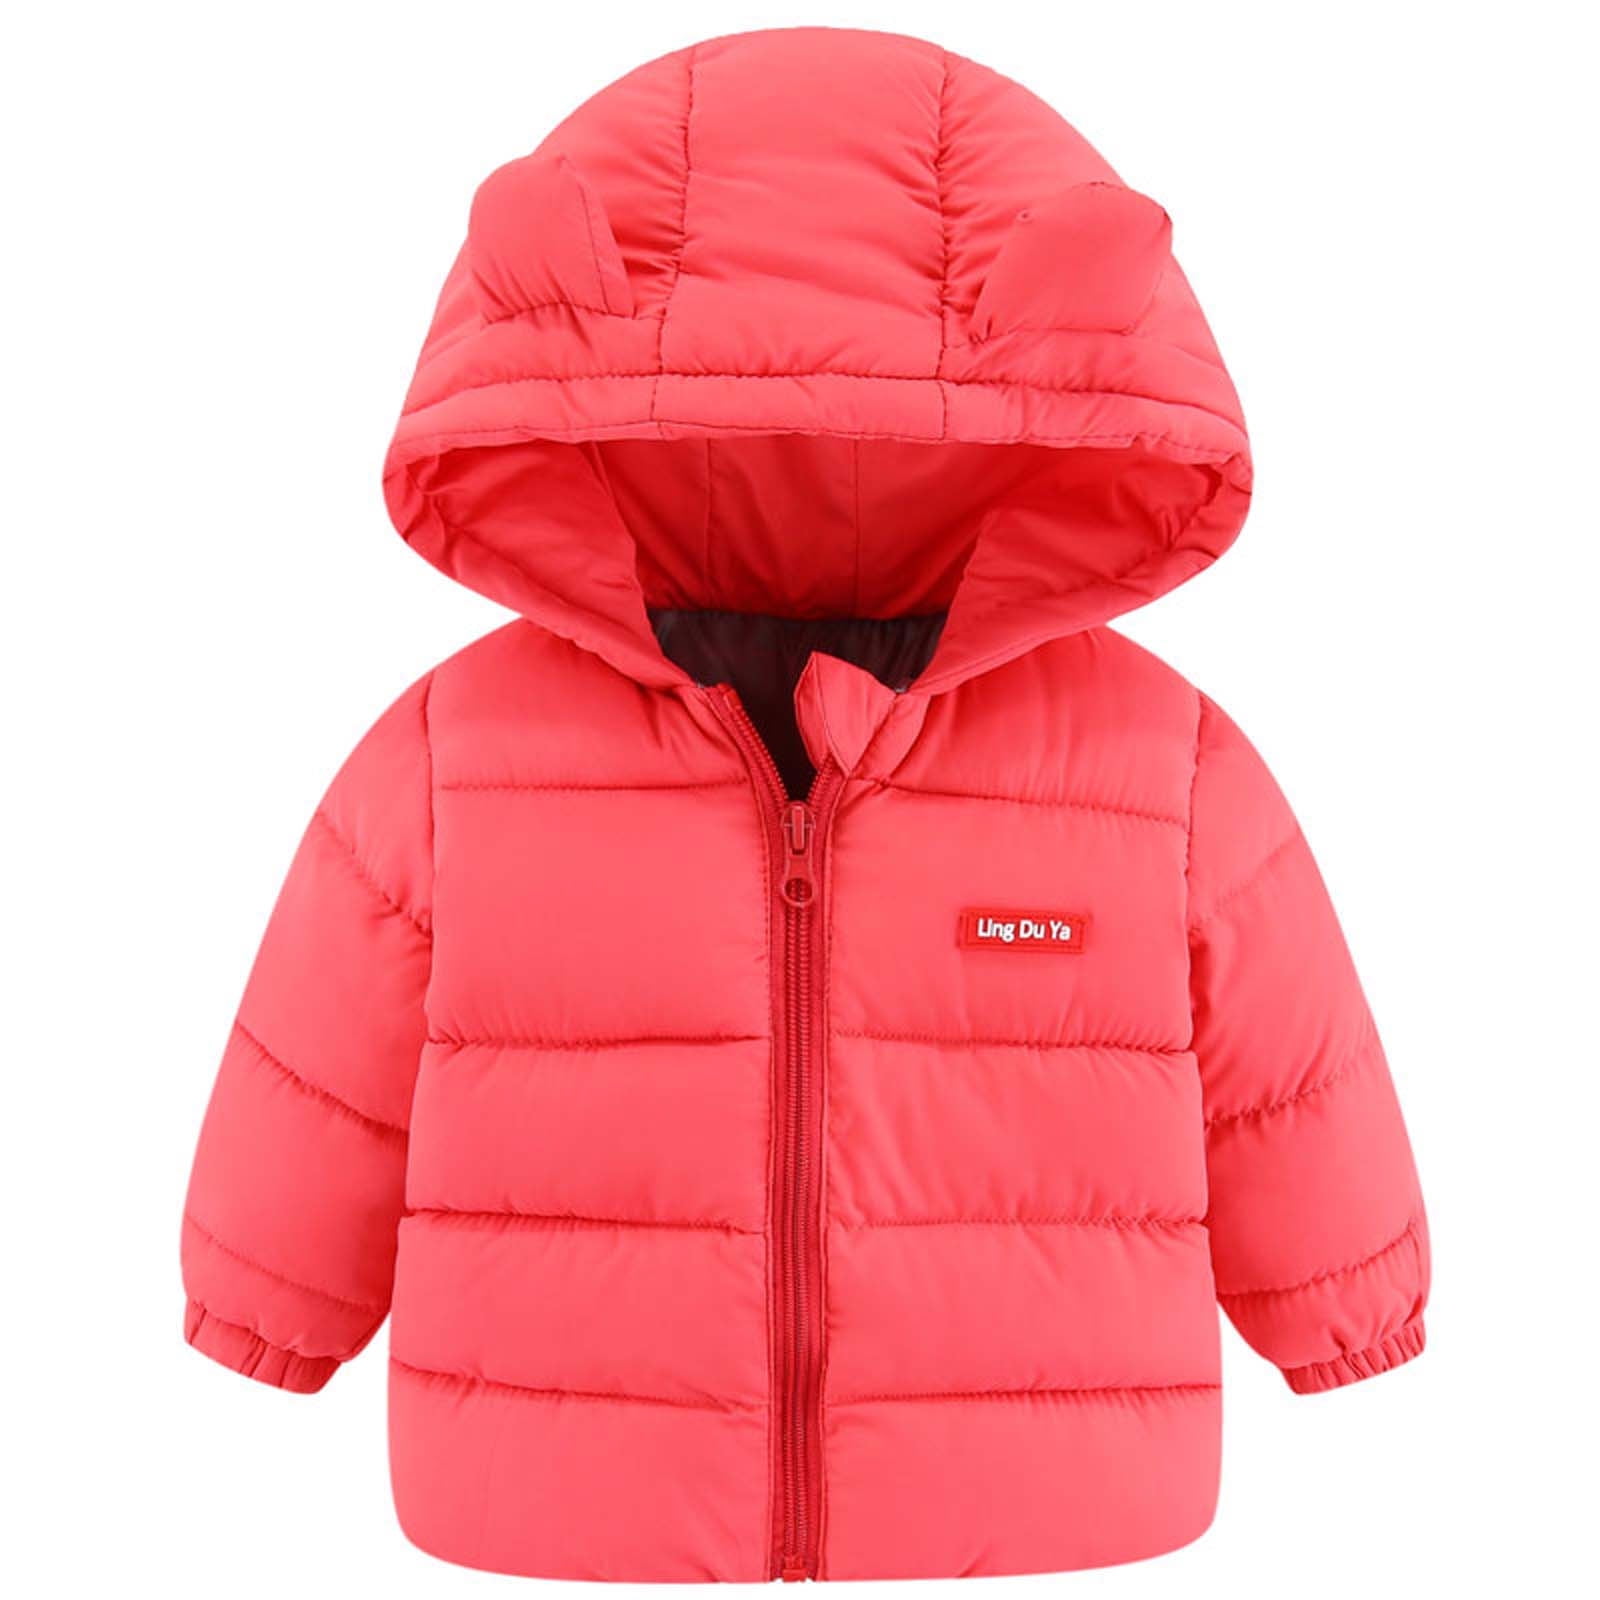 Details about   Kids Baby Boys Girls Winter Down Cotton Outerwear Hooded Thicken Snow Jacket